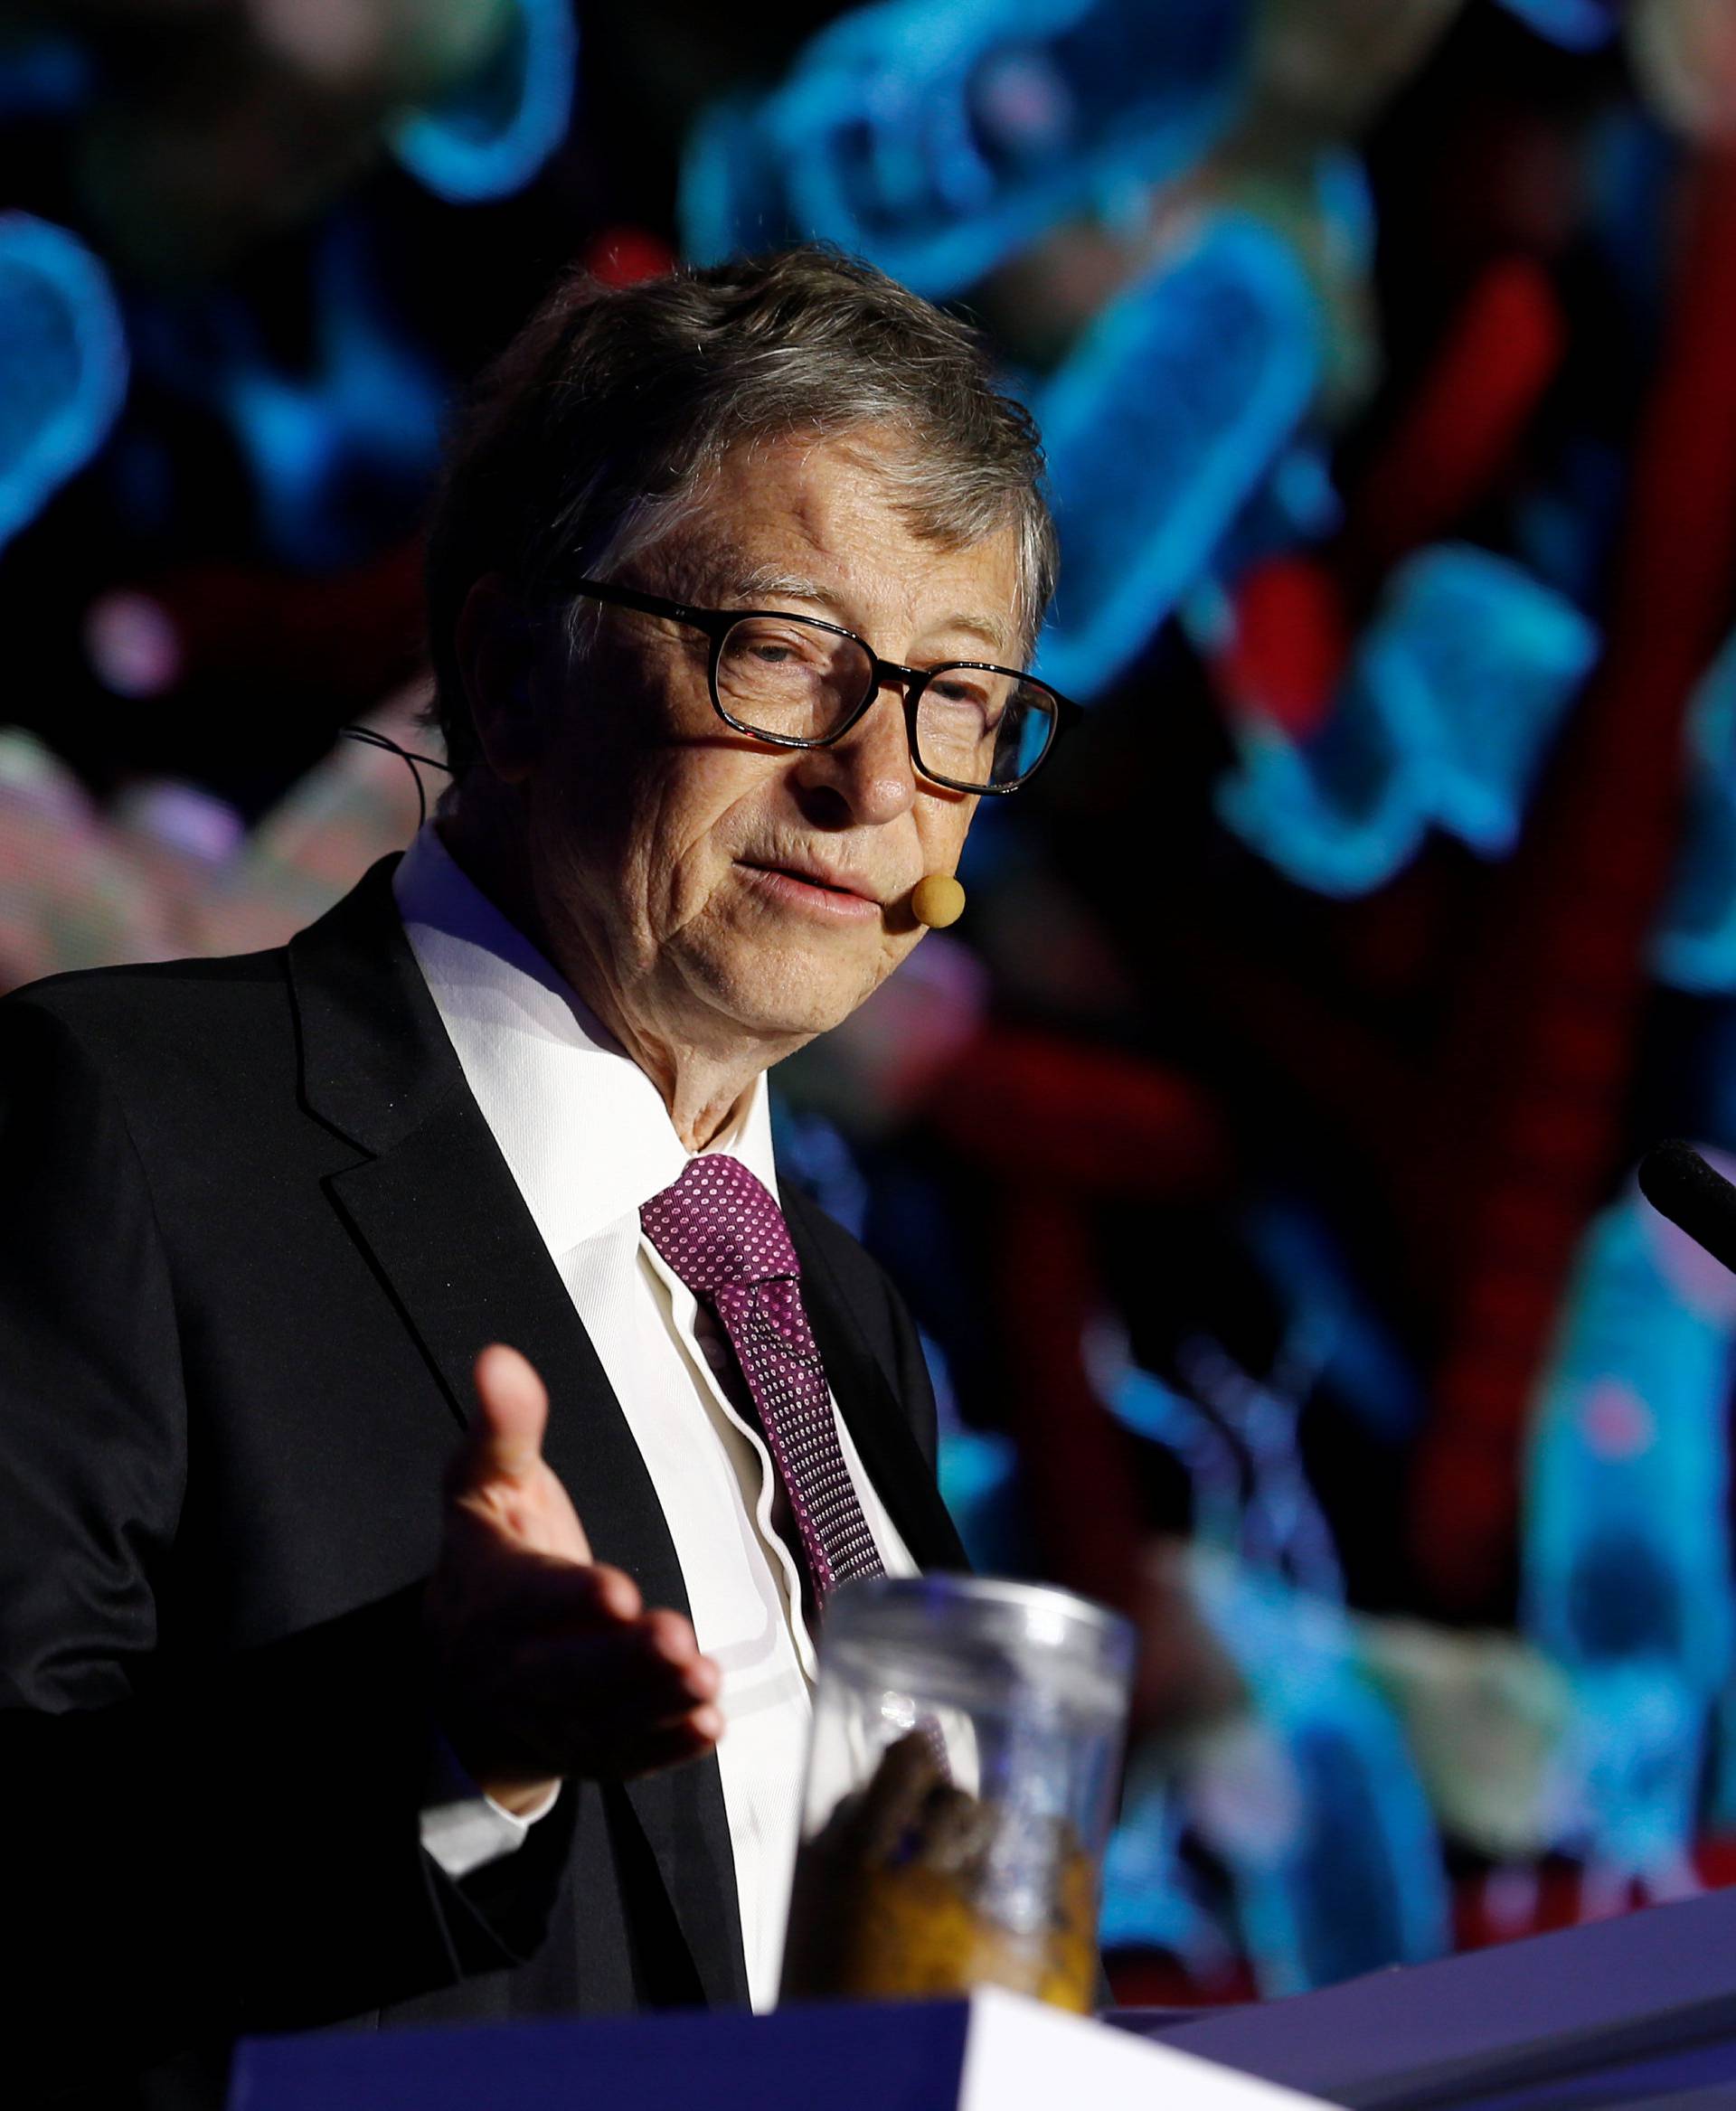 Microsoft founder Bill Gates points at a jar containing human faeces during his speech at the Reinvented Toilet Expo showcasing sewerless sanitation technology in Beijing